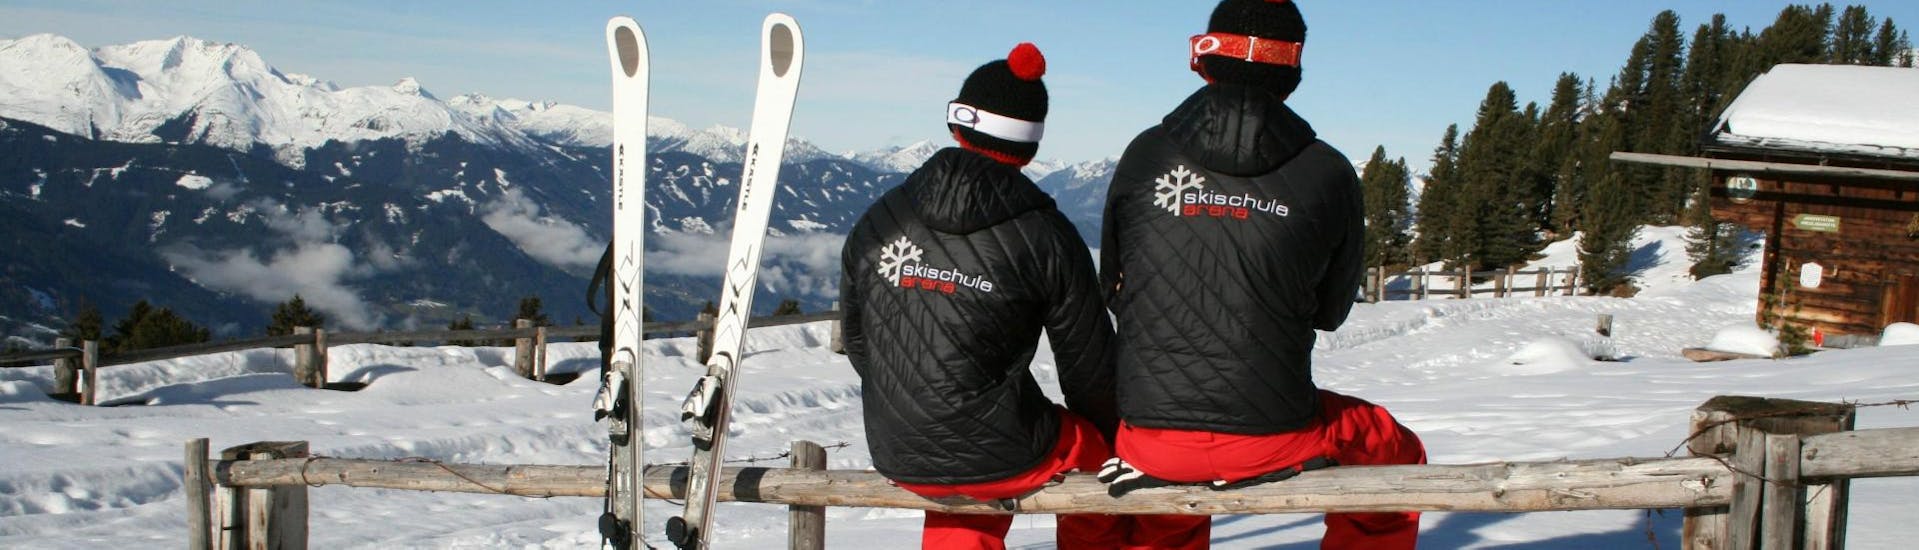 As the Ski Lessons for Adults - Beginners are over, two ski instructors from Skischule Arena in Zell am Ziller are taking a break and enjoy the magnificent views of the mountains covered in snow.